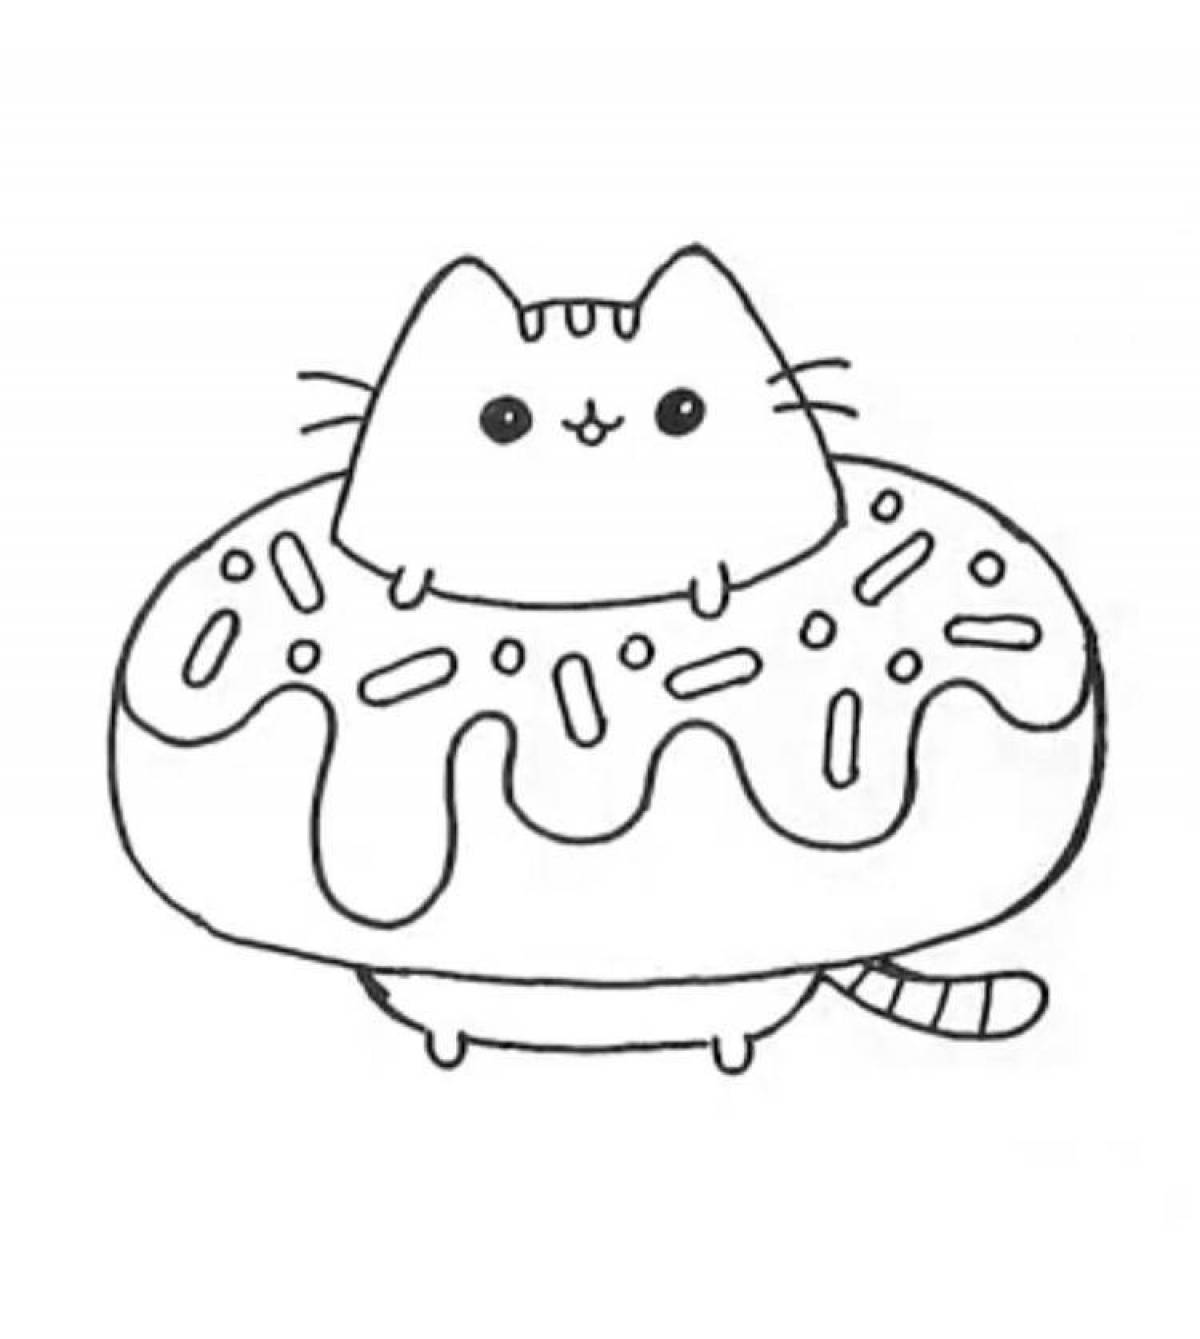 Coloring page incredible donut with a cat